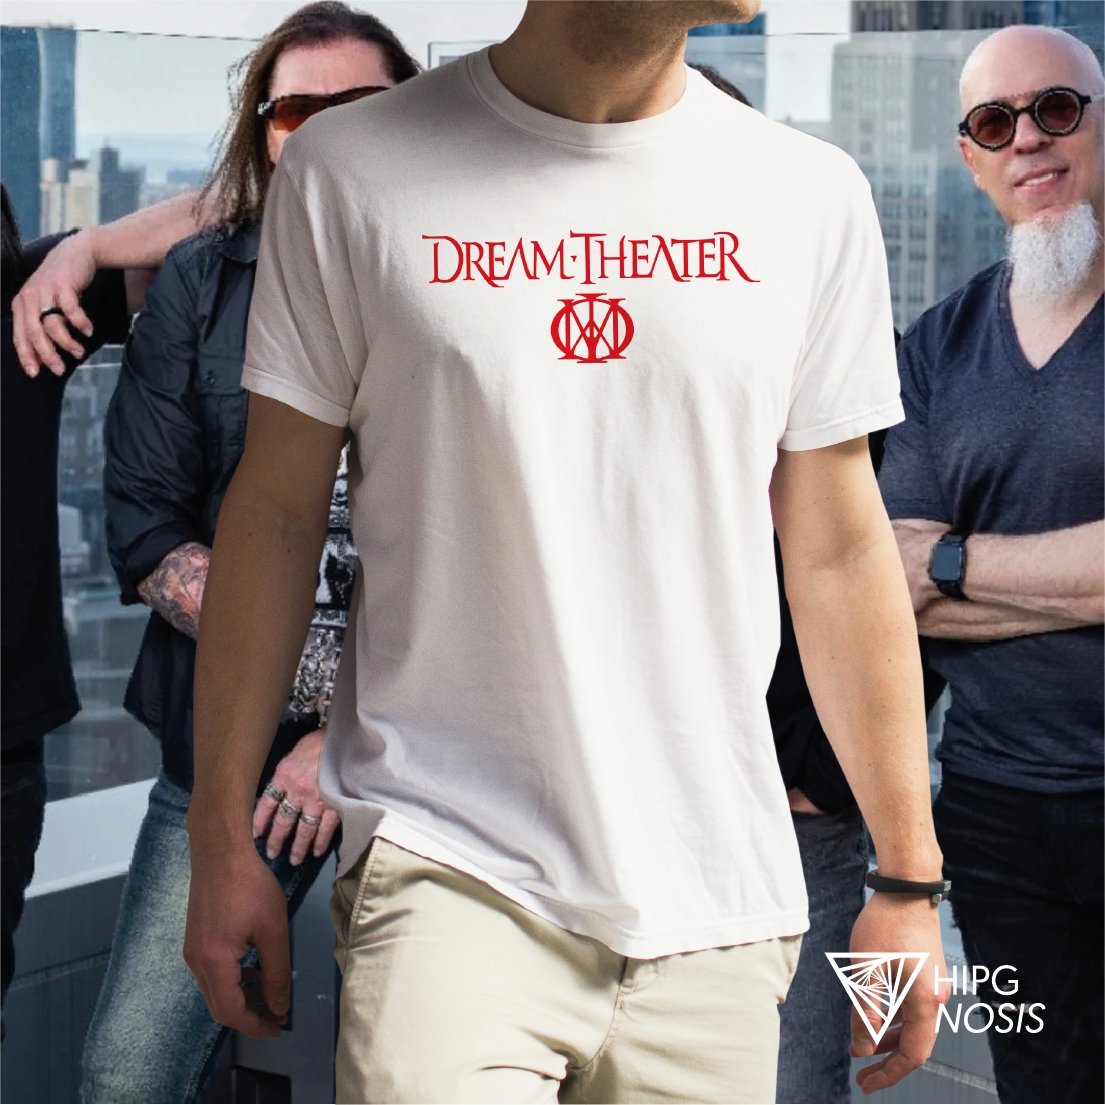 Dream theater 01 - Hipgnosis